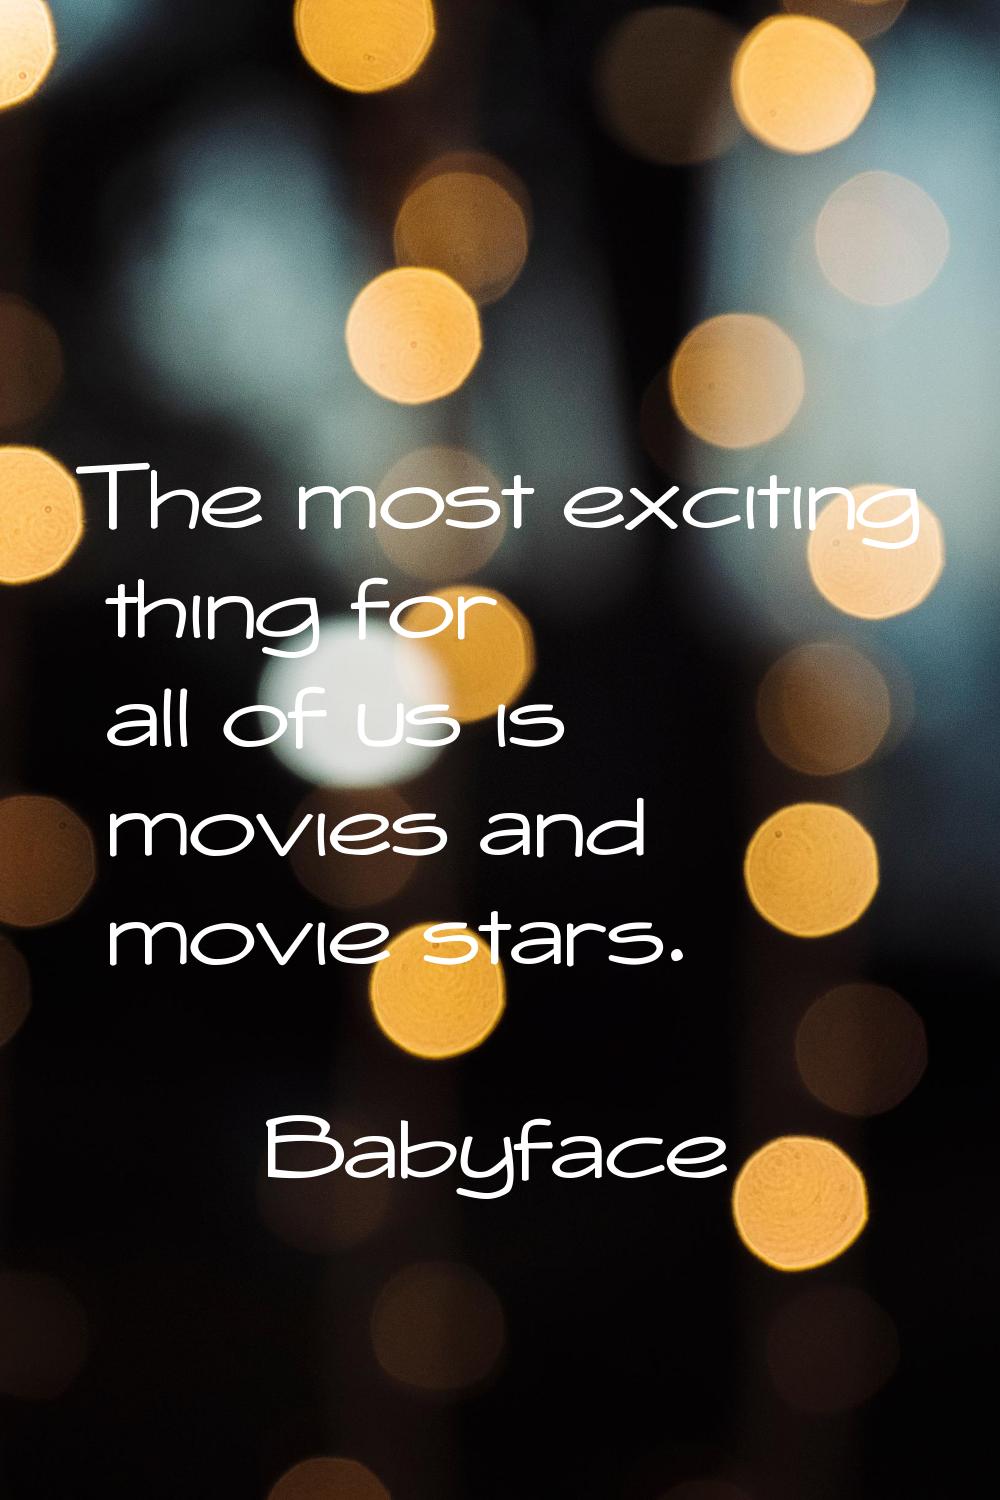 The most exciting thing for all of us is movies and movie stars.